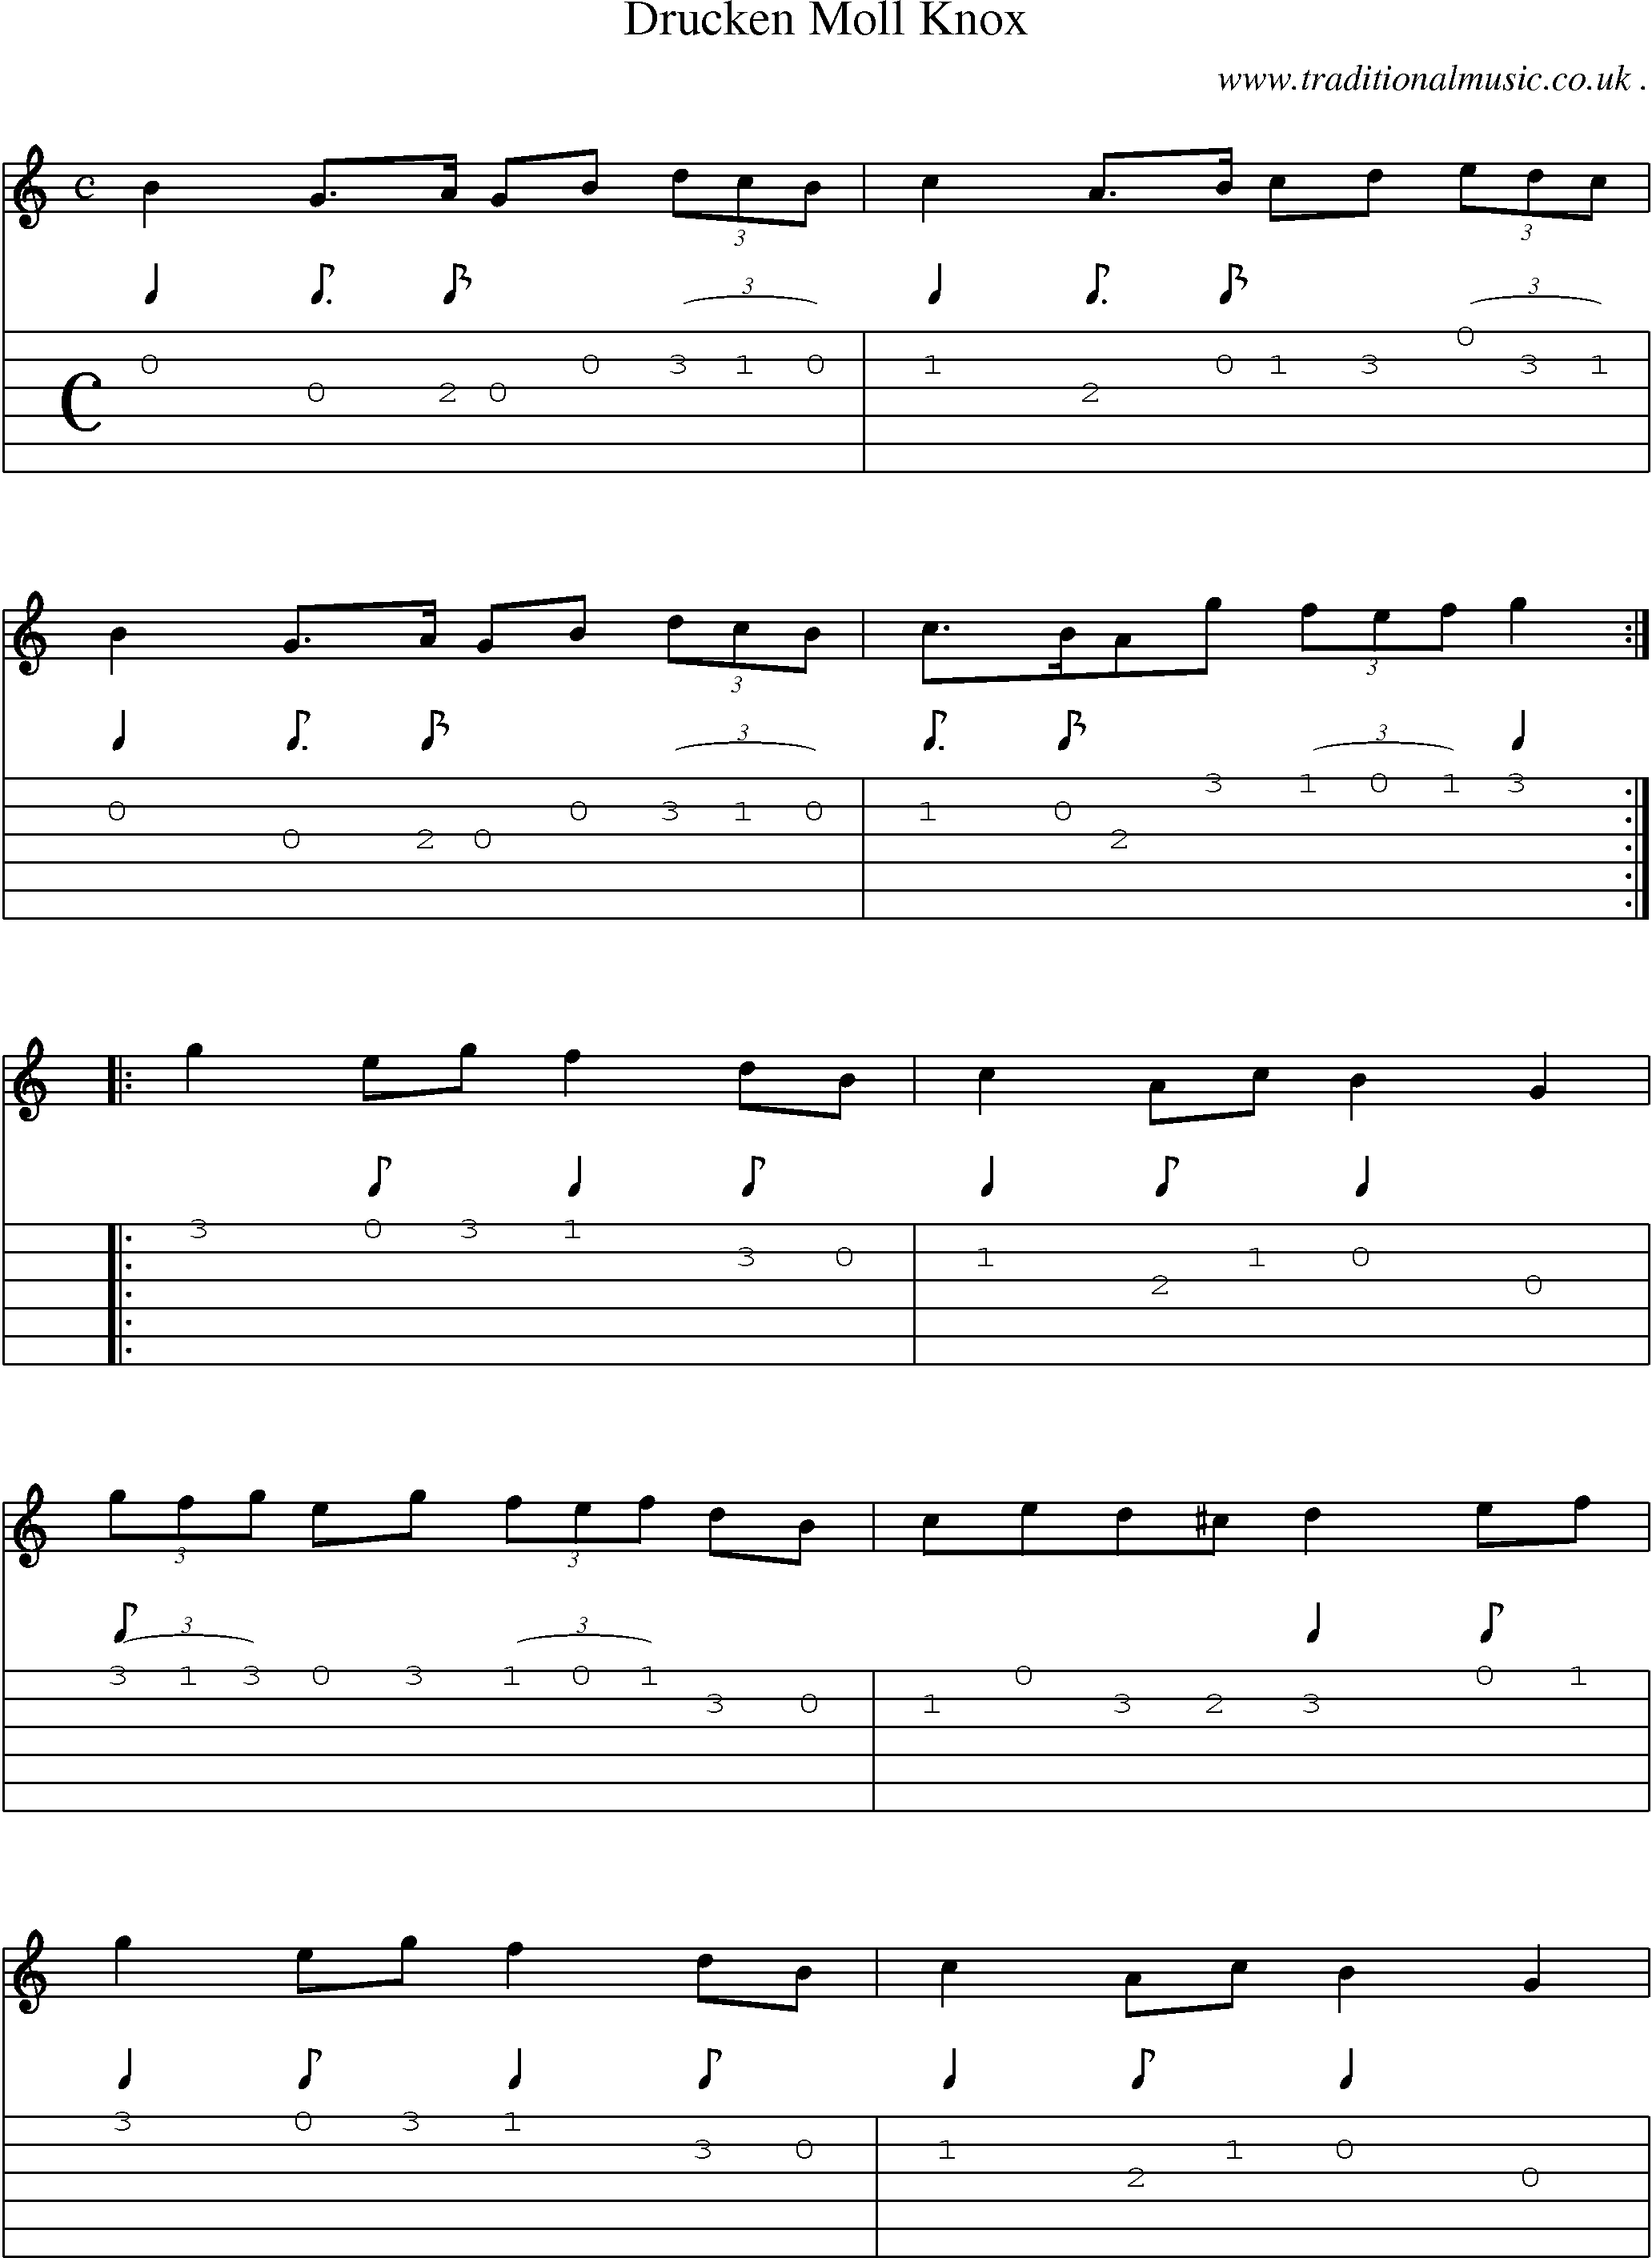 Sheet-Music and Guitar Tabs for Drucken Moll Knox